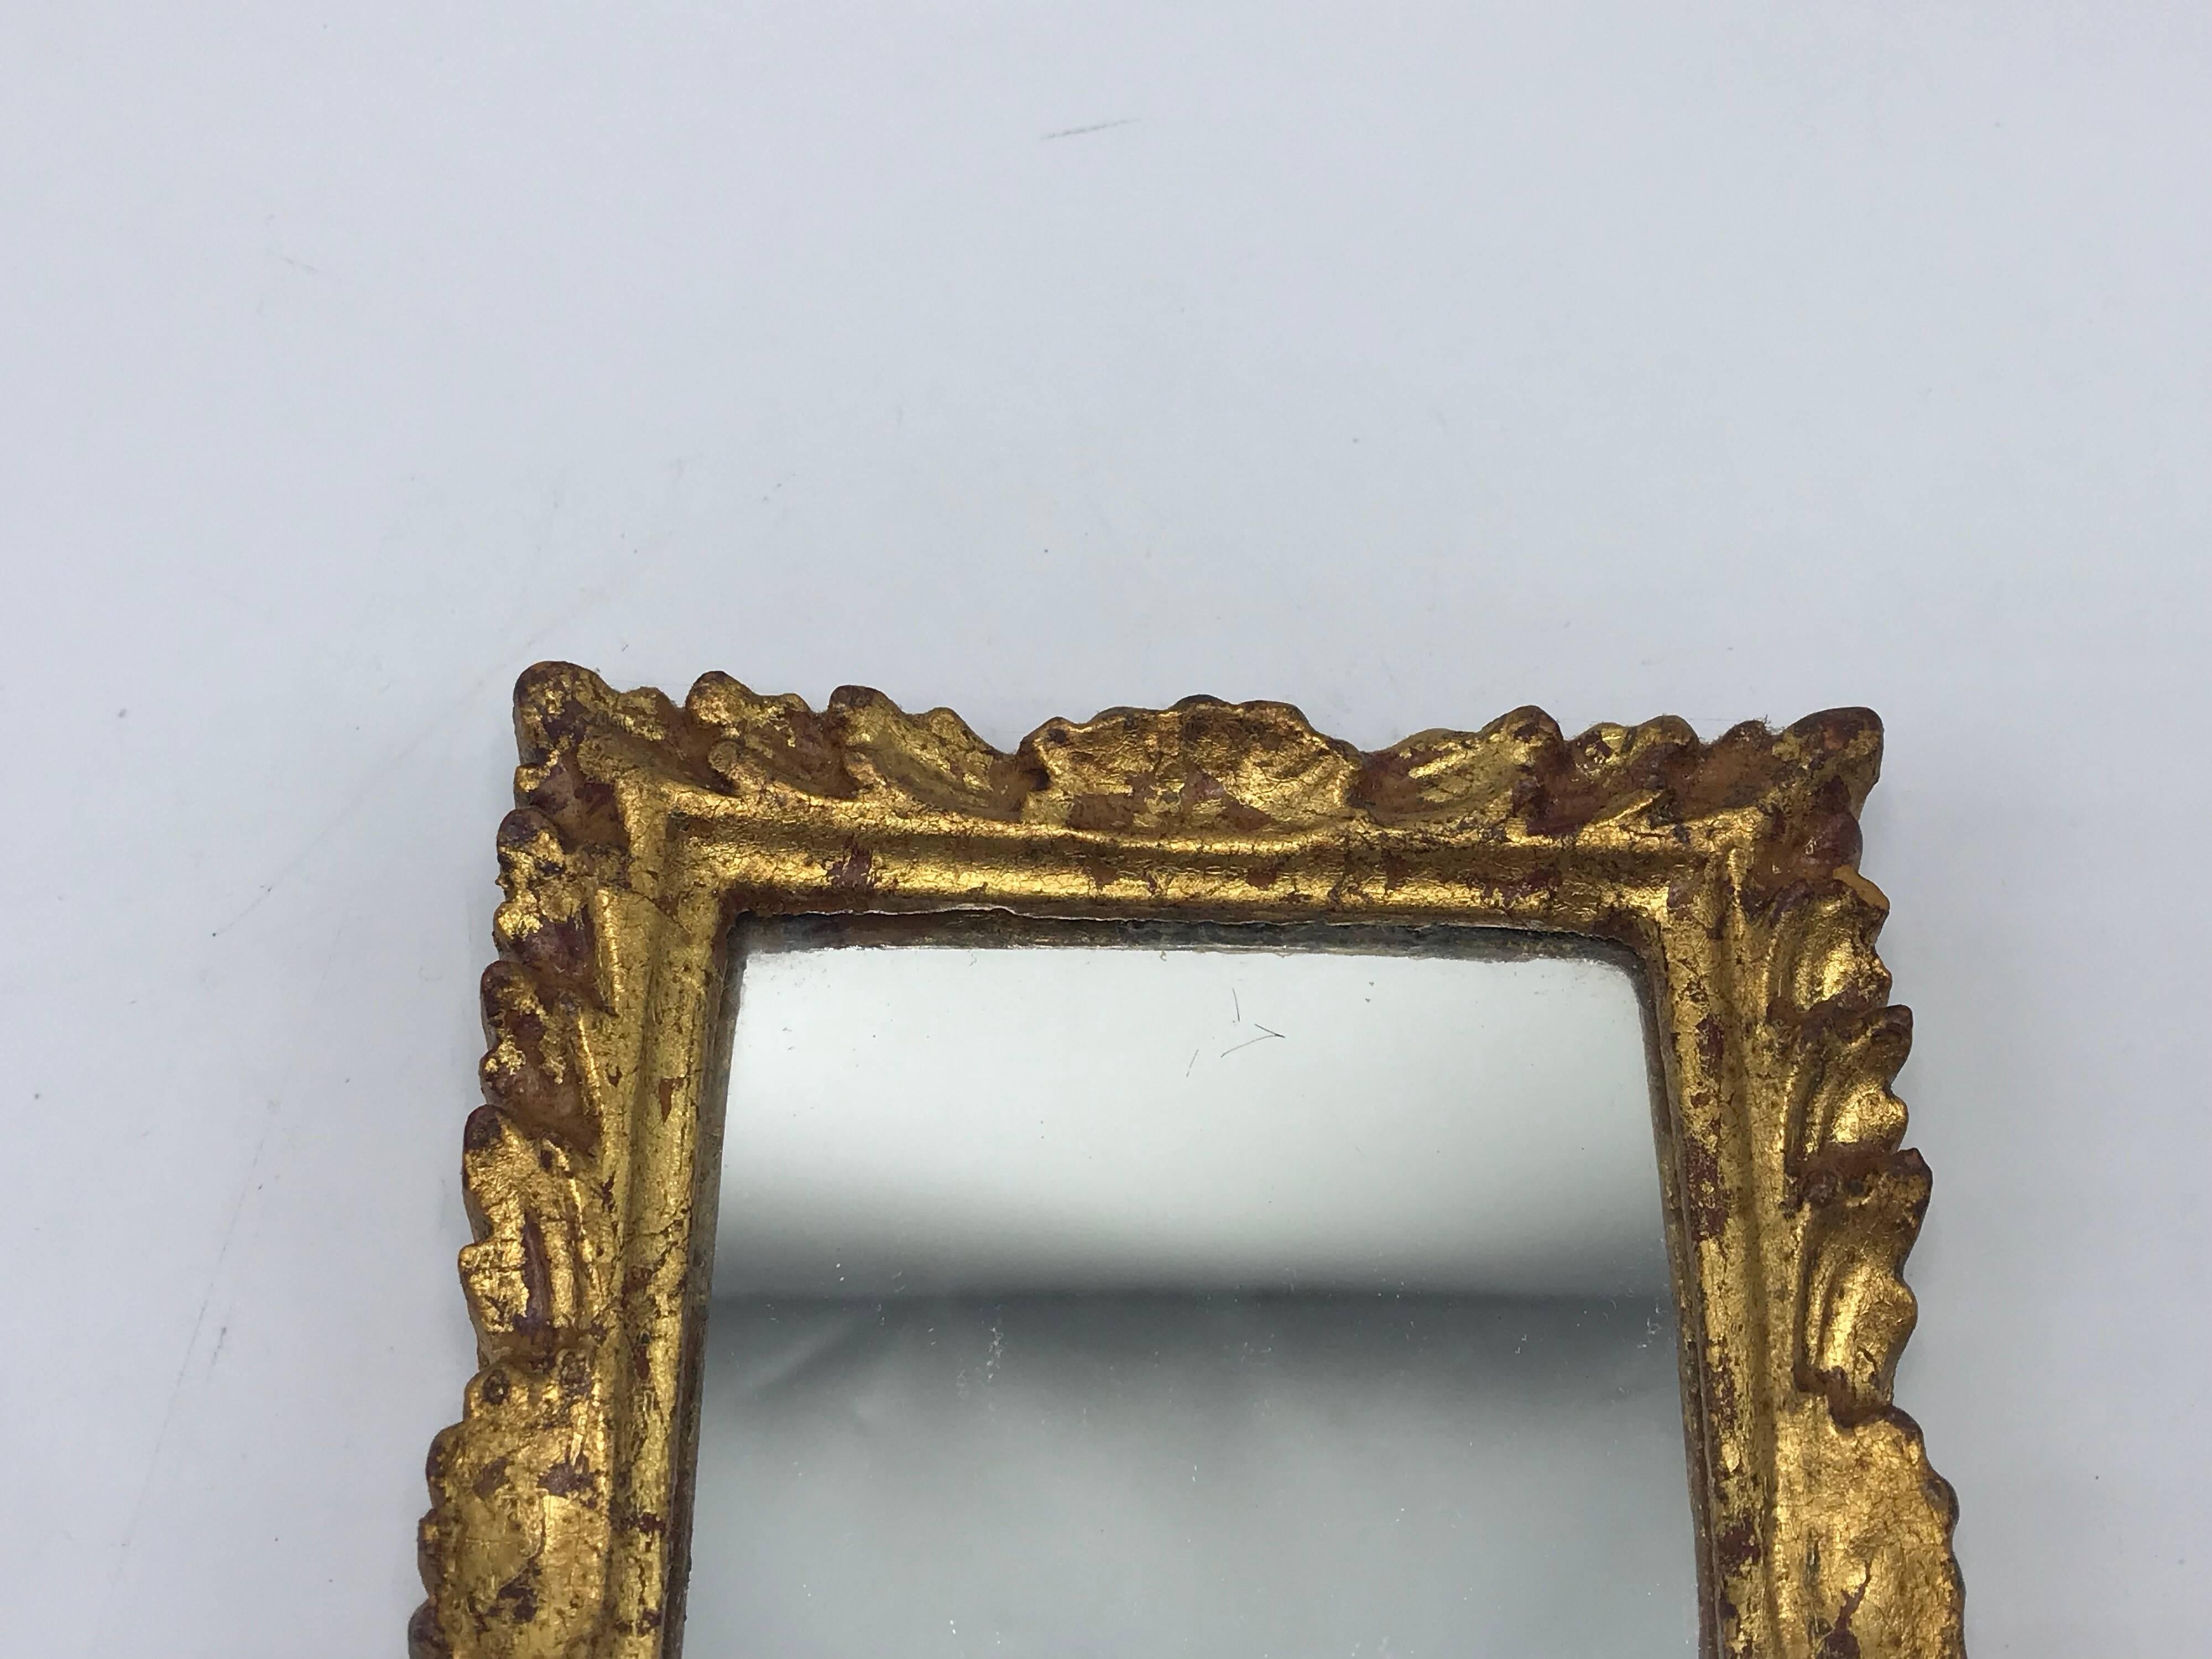 Offered is a gorgeous, small 1960s Italian Florentine gilded rectangular mirror. Marked ‘Made in Italy’ on backside.